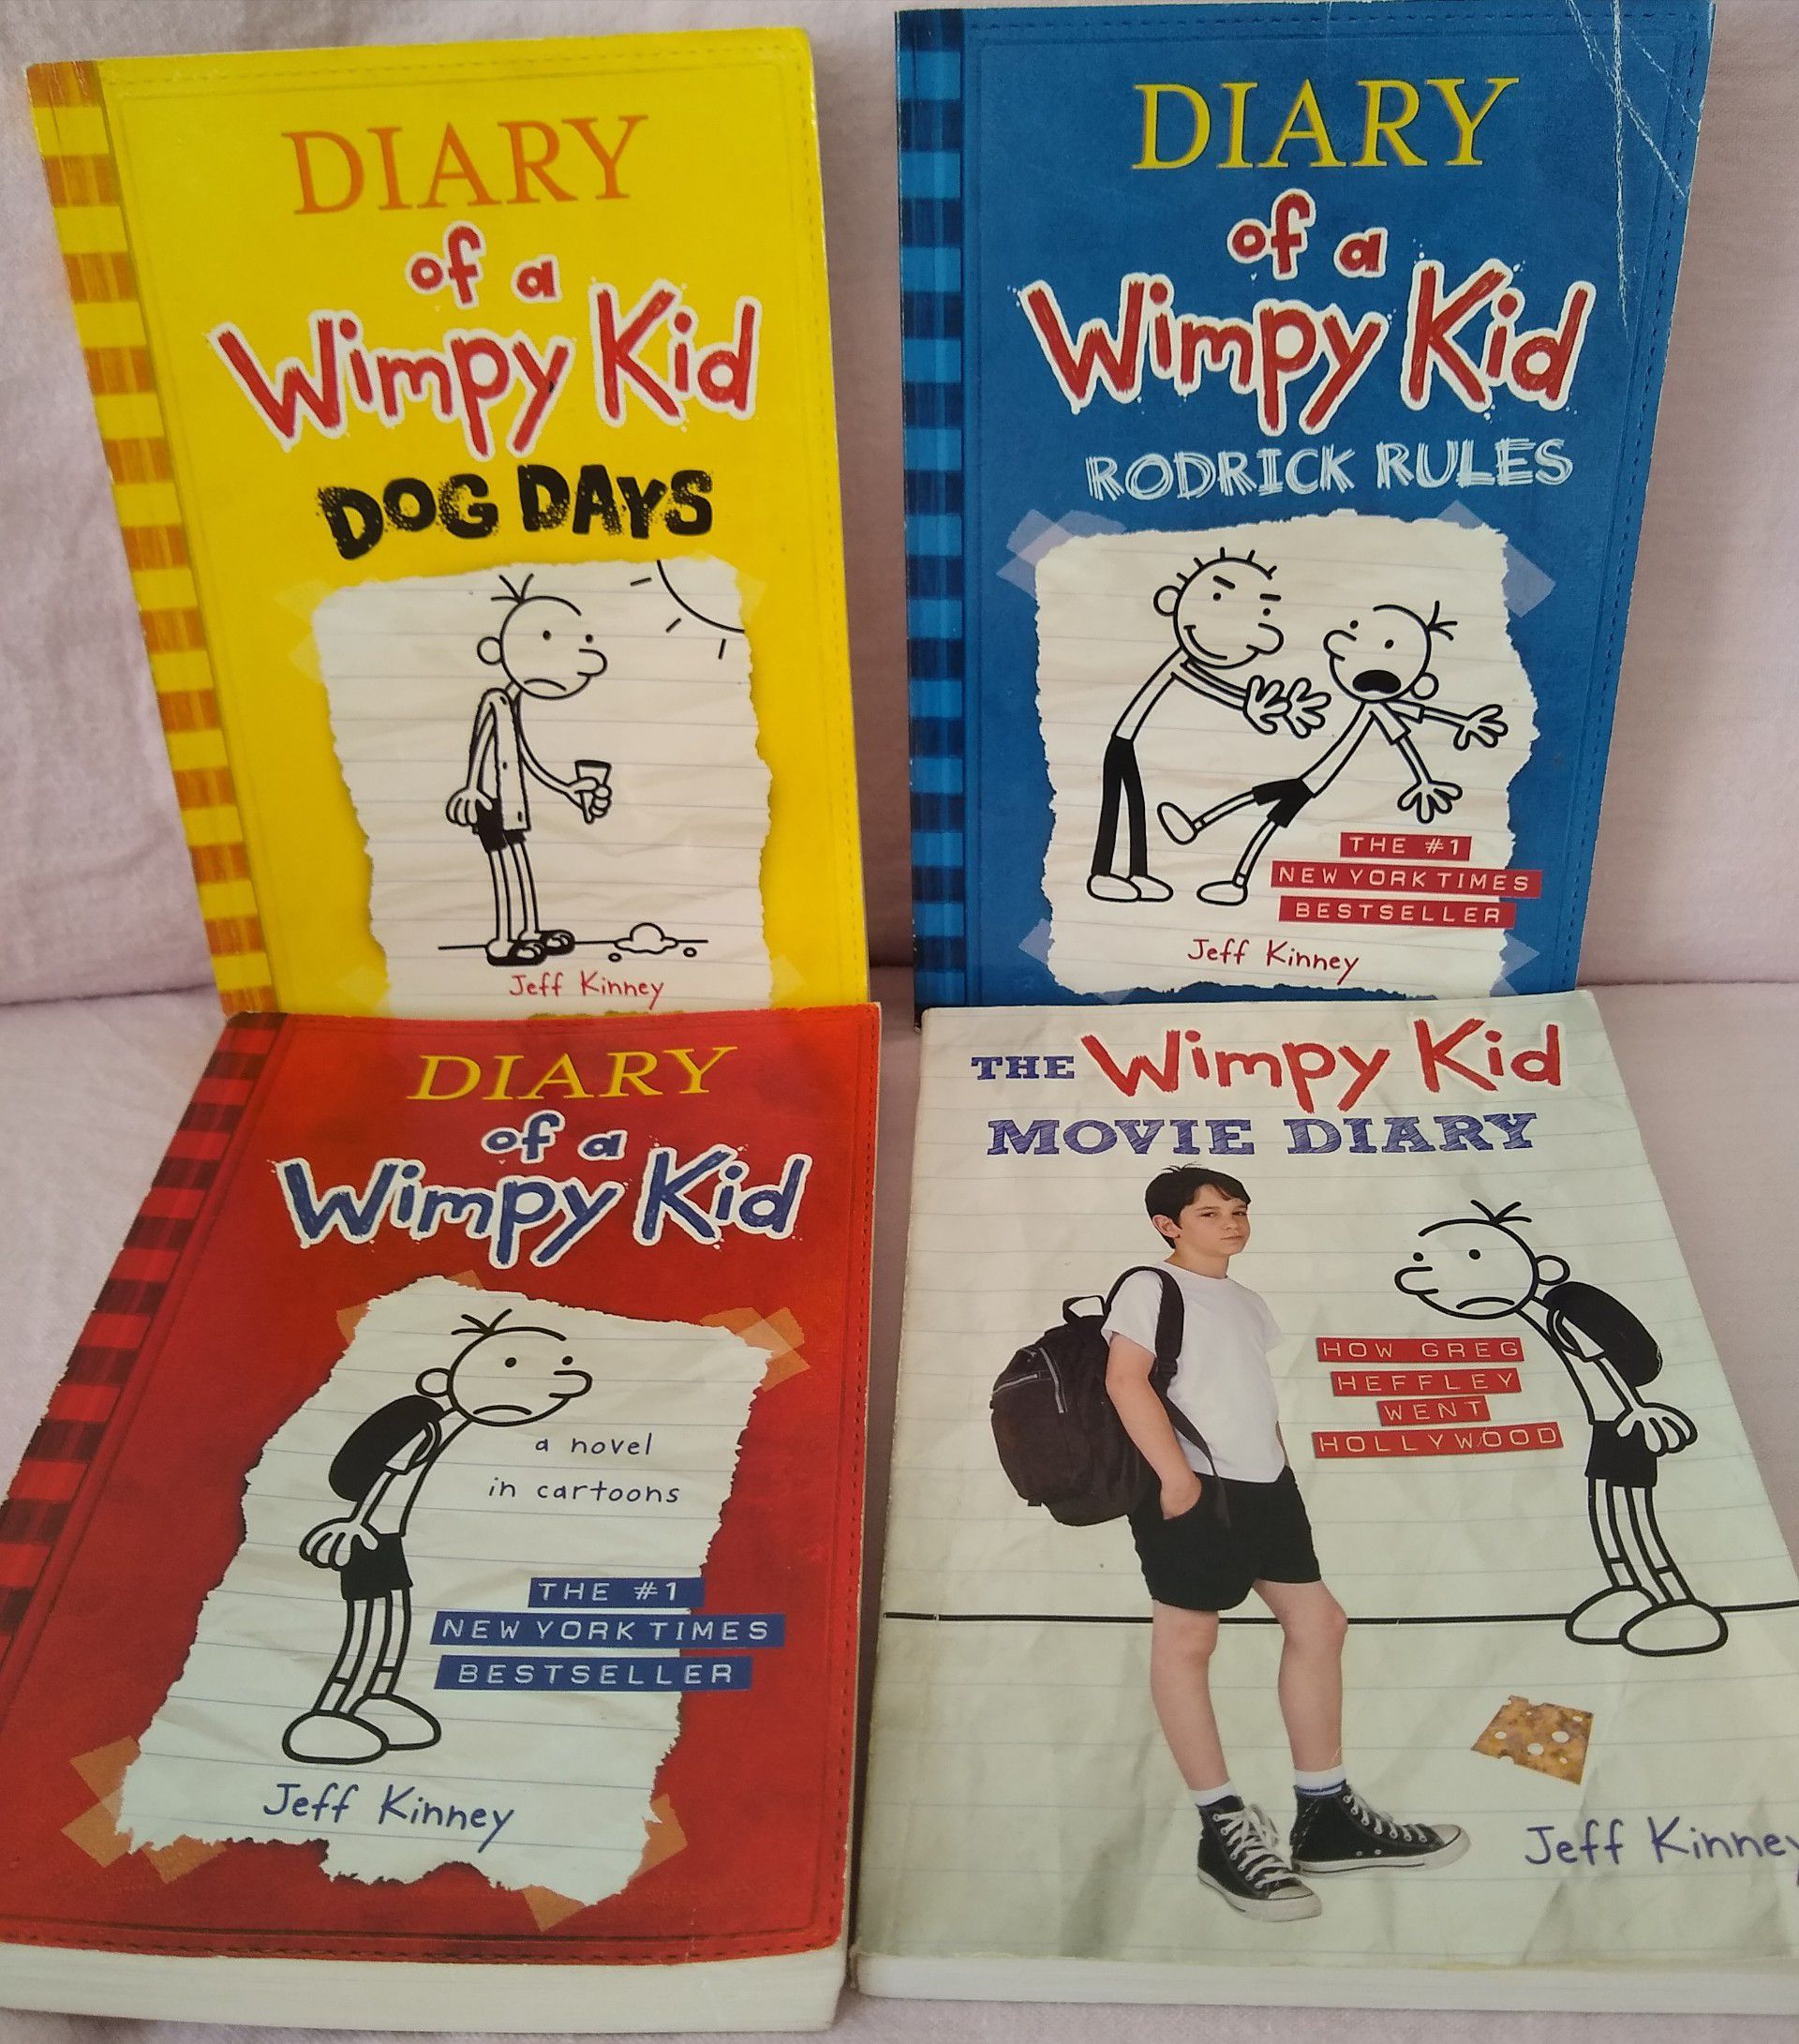 4 diary of a wimpy kid books for kid. All for $10